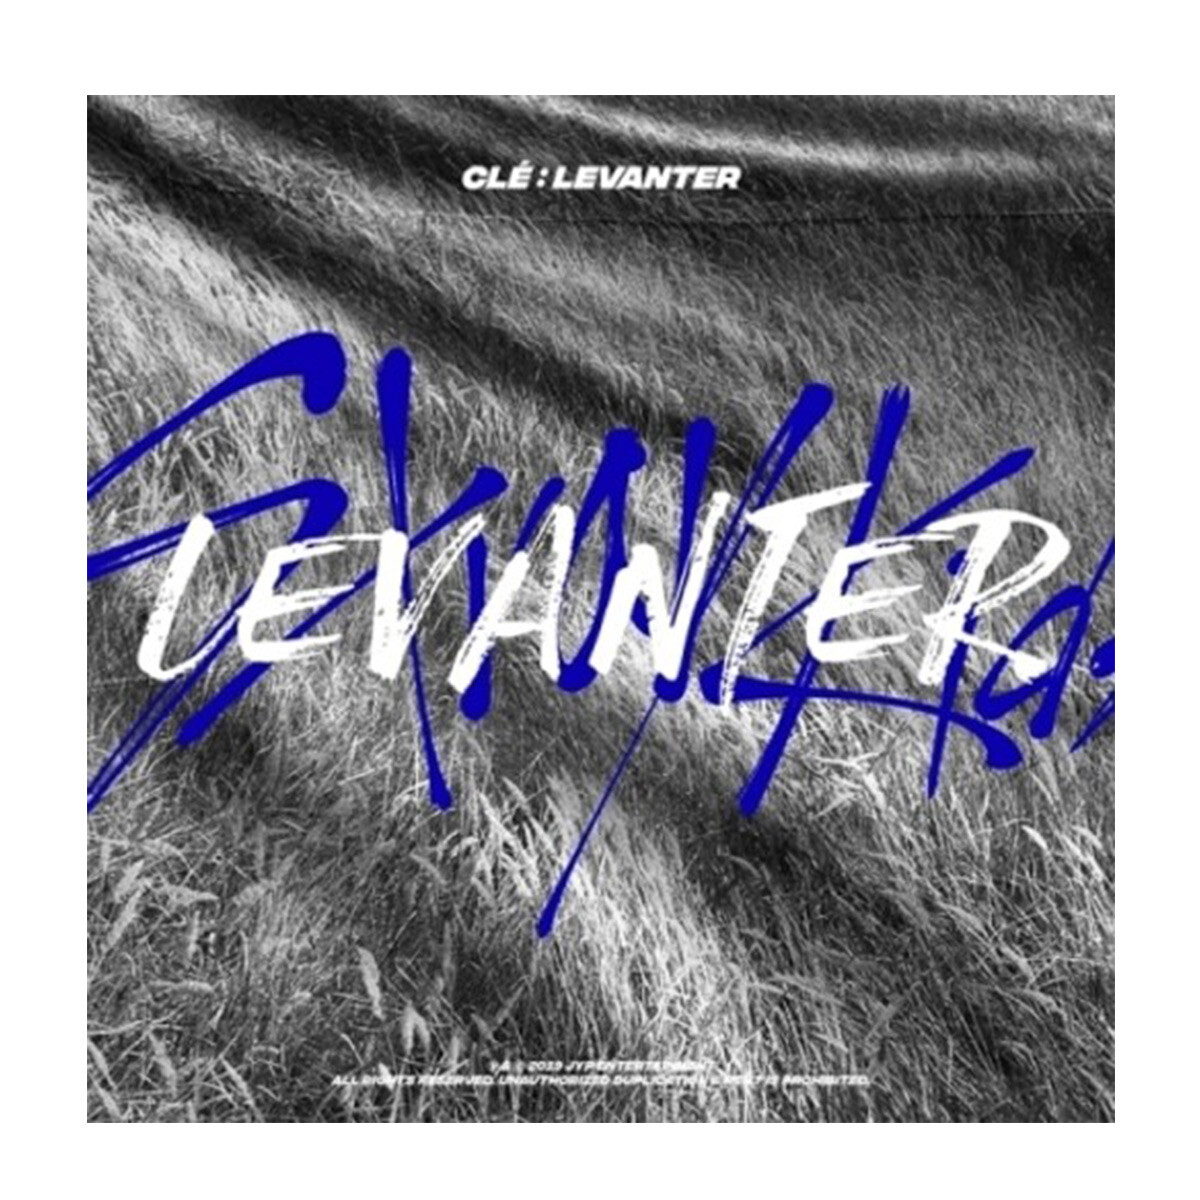 Stray Kids - Cle: Levanter - Cd 